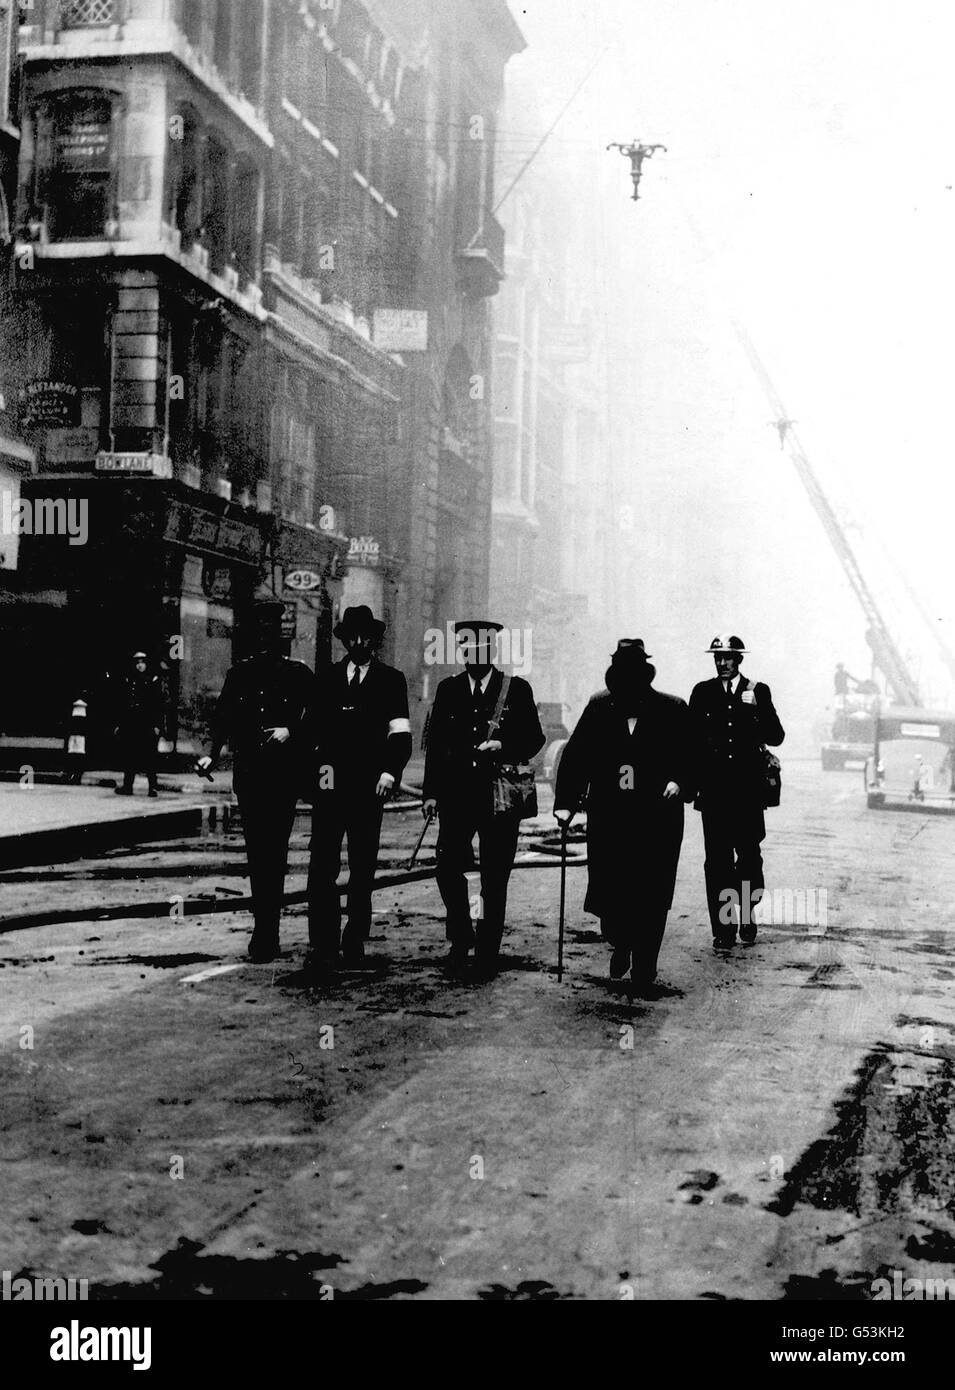 Prime Minister Winston Churchill (second from the right) during a tour of the damage caused by a night air raid on Cheapside past St.Mary-le-Bow in central London, during the Second World War Blitz. Stock Photo